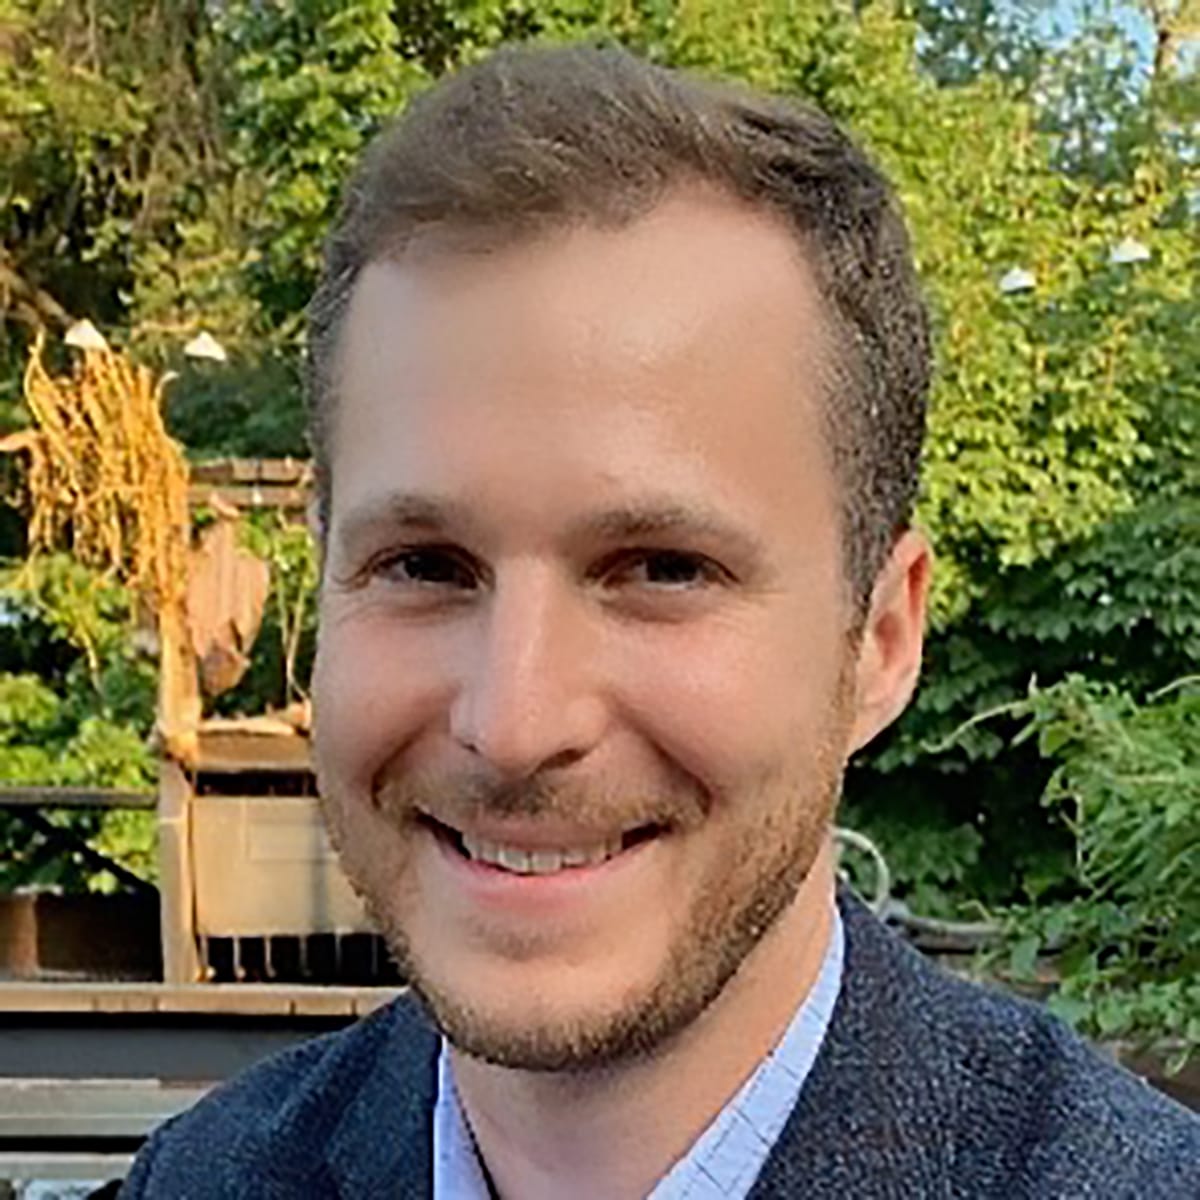 Jason Asher, Ph.D., is the director of the Predict division for the Center of Forecasting and Outbreak Analytics. He has short blond hair, smiling, wearing a grey shirt against a background of green trees.